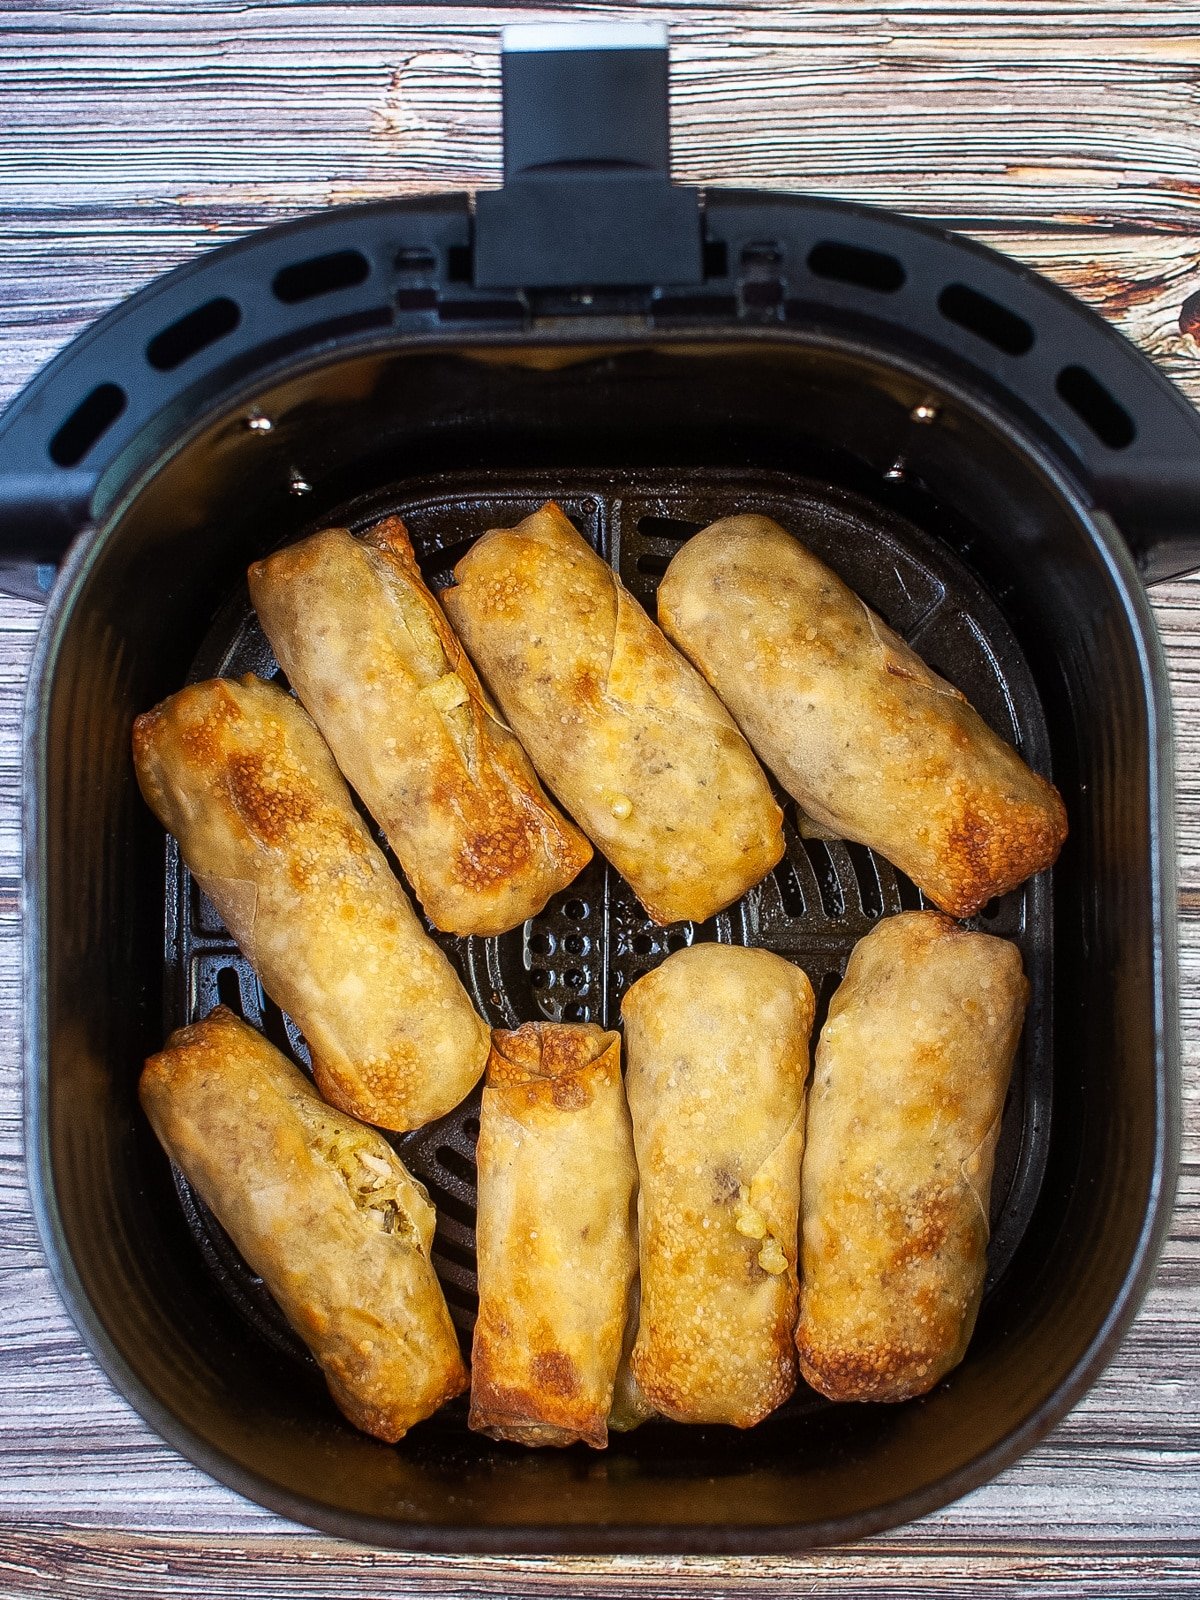 An air fryer filled with fried rolls.